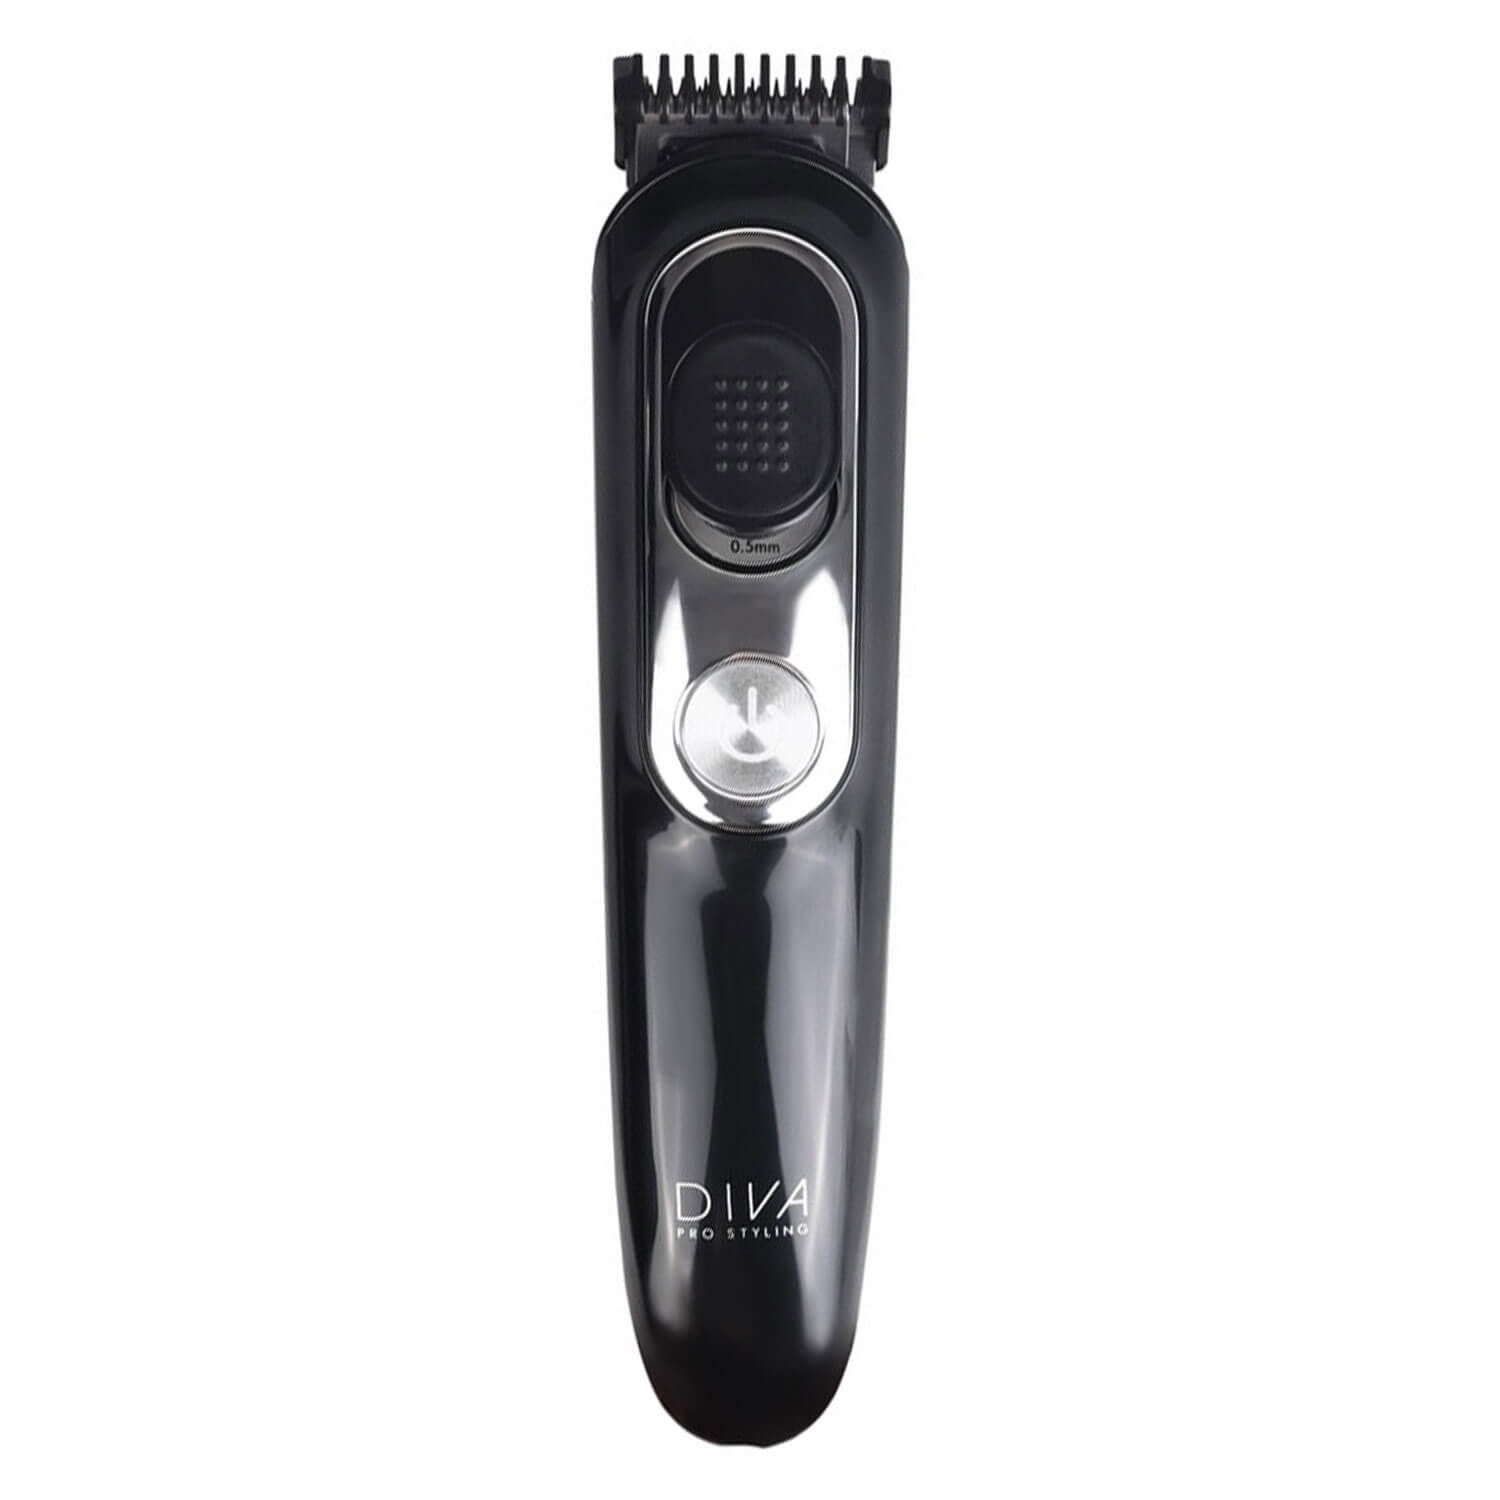 Product image from Diva - Cutting Edge Professional 5in1 Trimmer